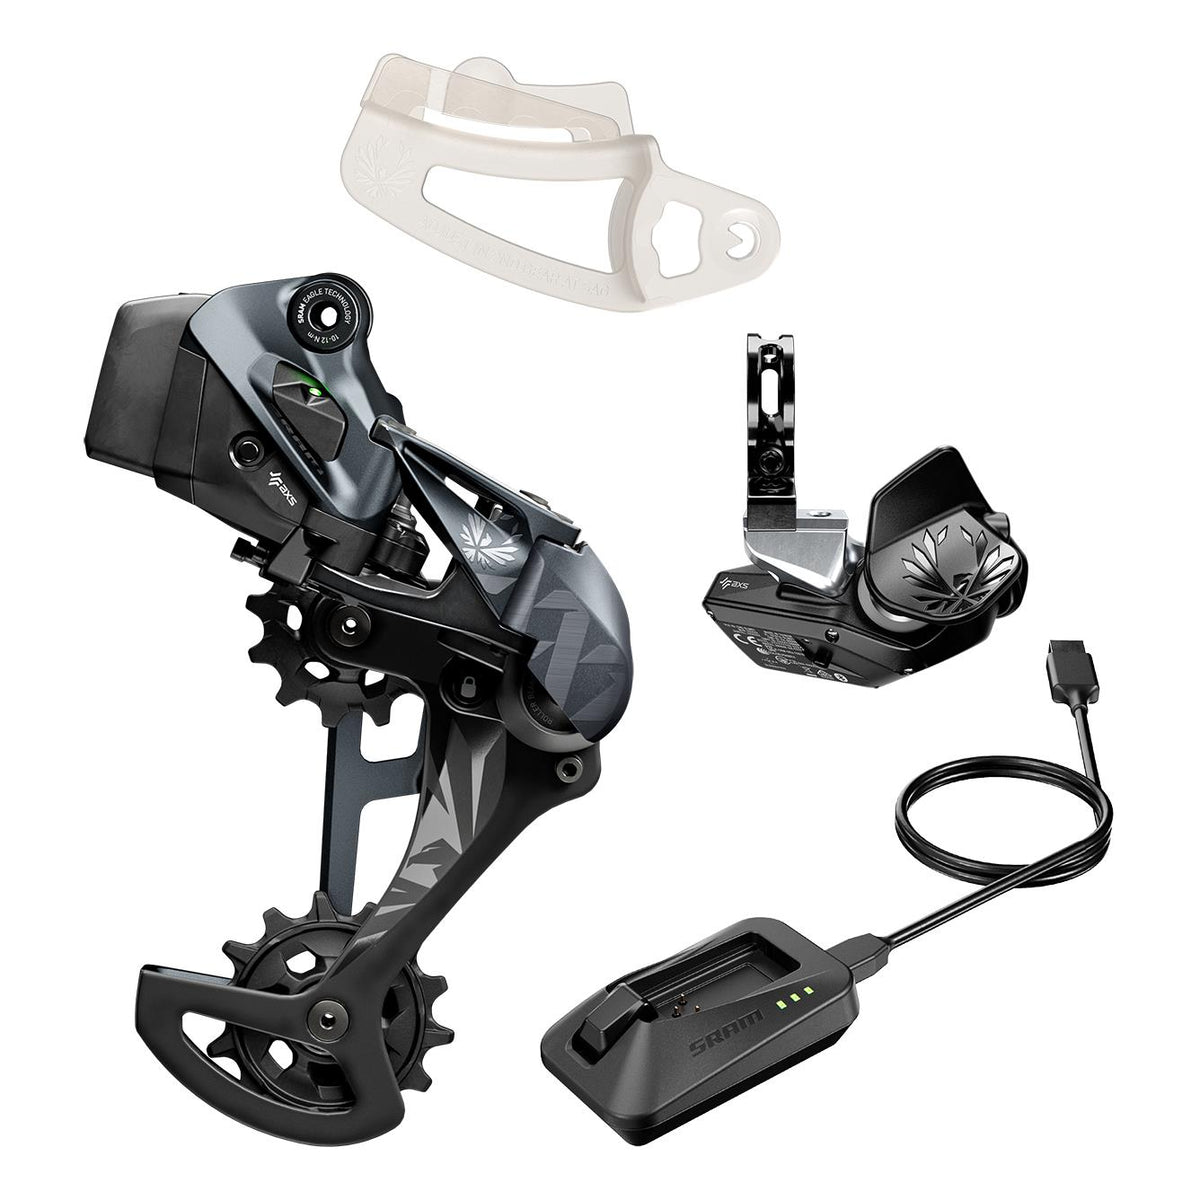 Sram Xx1 Eagle Axs Upgrade Kit (Rear Der W/Battery And Battery Protector, Rocker Paddle Controller W/Clamp, Charger/Cord, Chain Gap Tool)